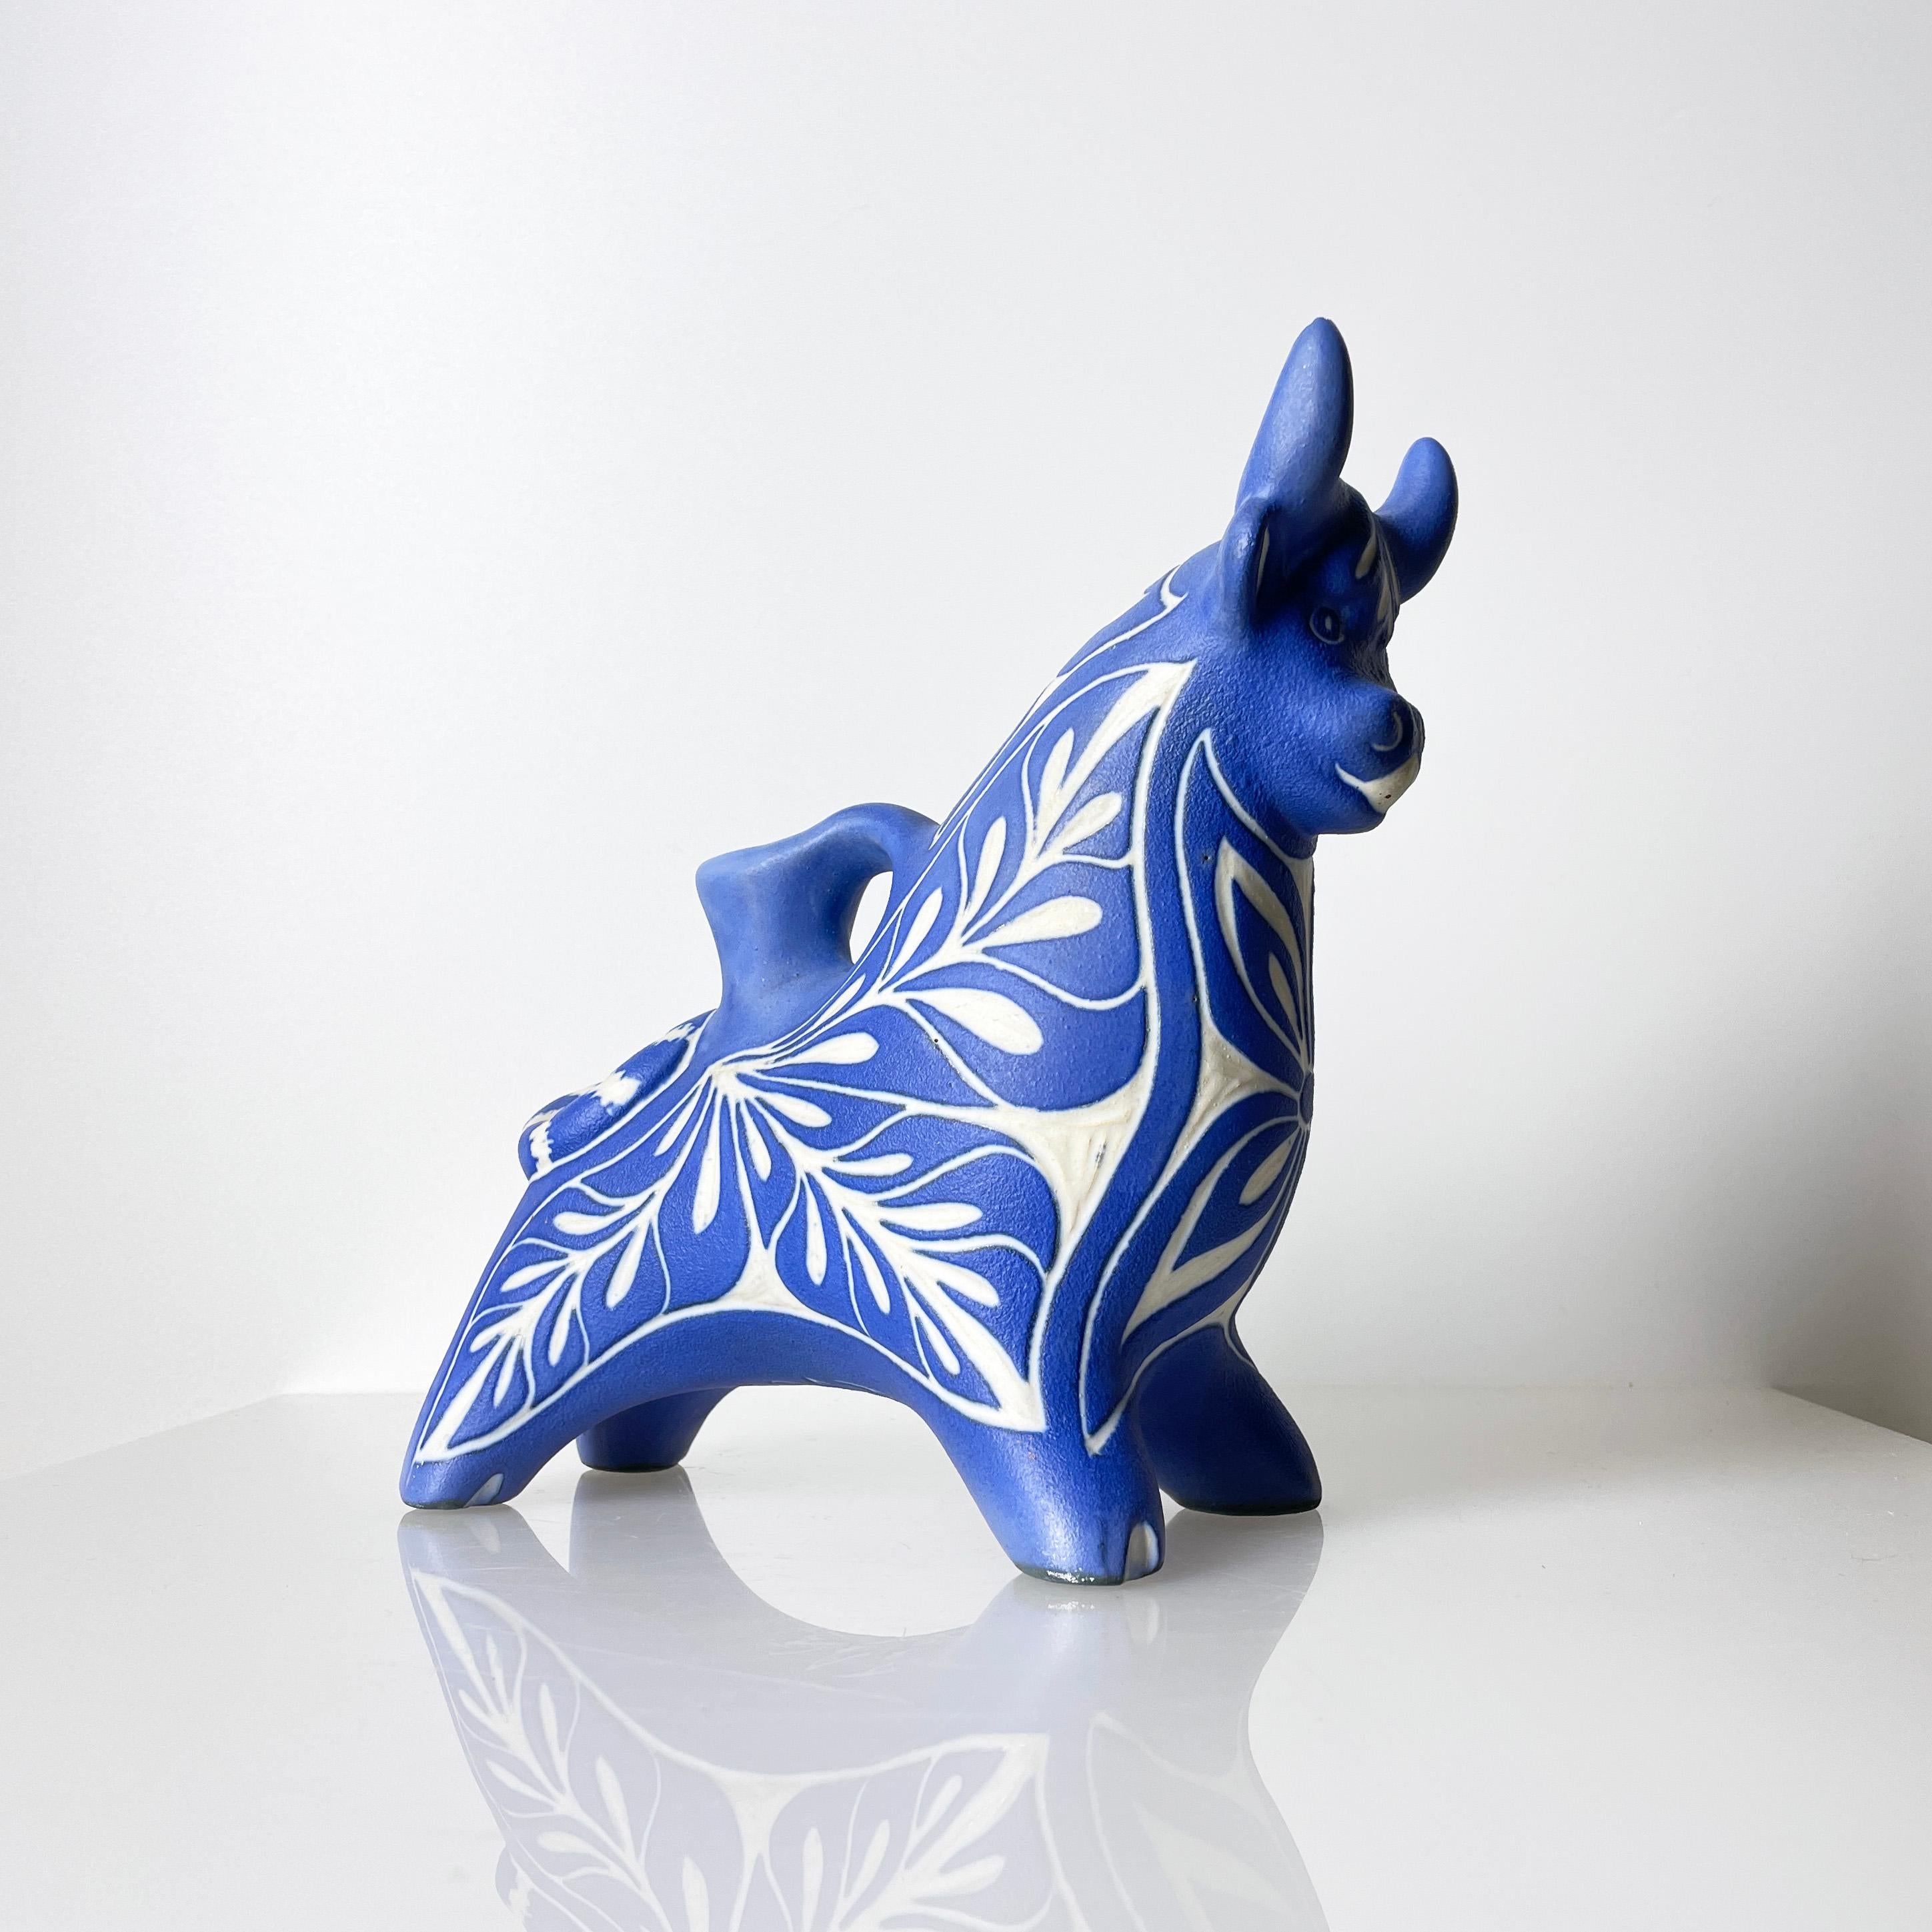 1970s Pablo Zabal Chile decorative porcelain bull. With insert for use as a candle holder. Signed on base: Pablo Zabal Chile. 
Diameter: ca. 28cm.  Height: 25cm. 
Beautiful eye catching azure blue decorative piece with distinctive pattern.  In